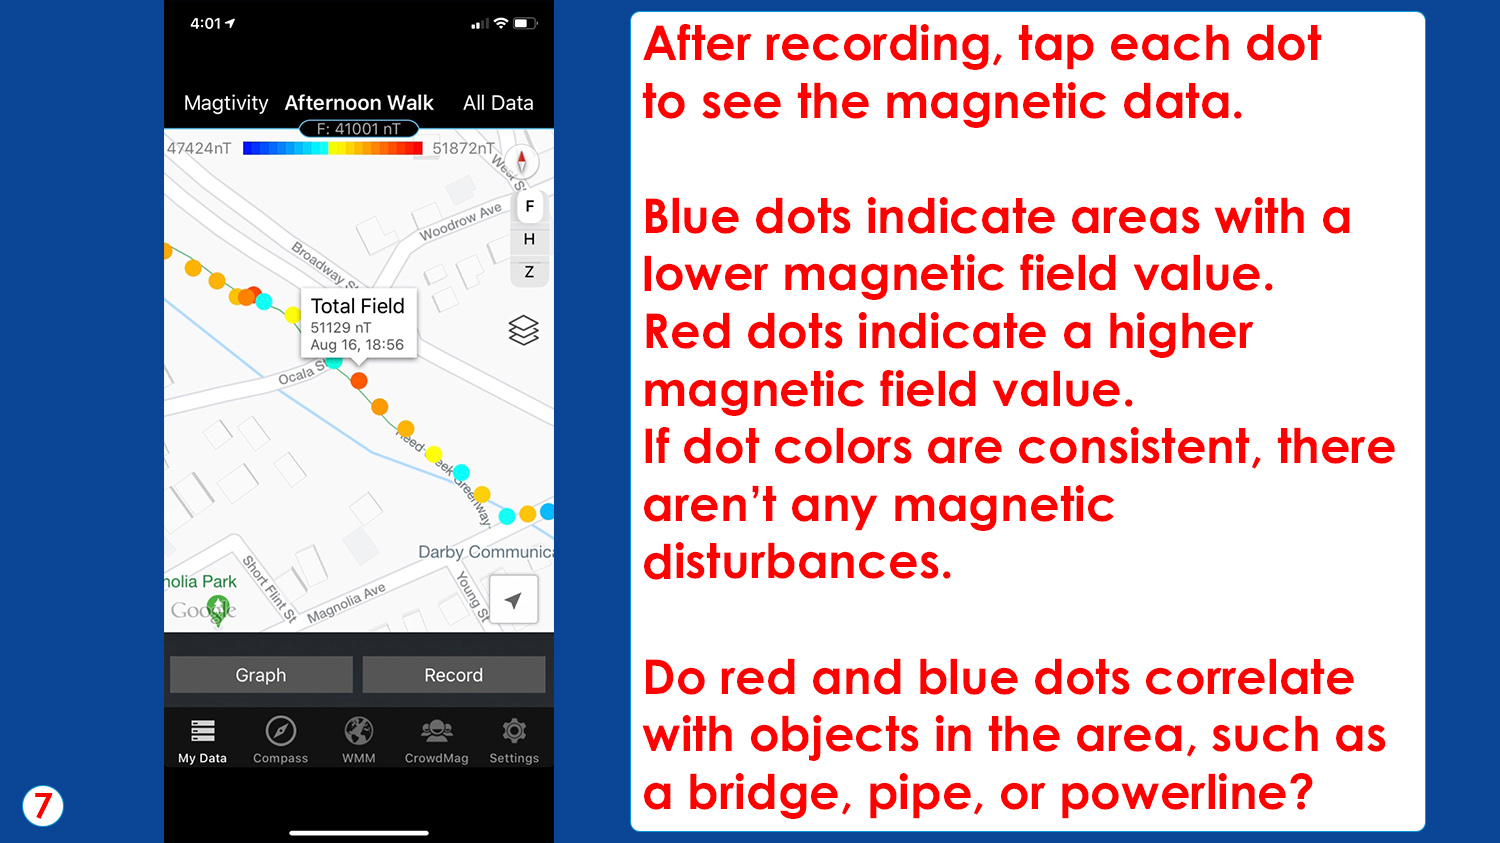 After recording, tap each dot to see the magnetic data. 

Blue dots indicate areas with a lower magnetic field value. Red dots indicate a higher magnetic field value. If dot colors are consistent, there aren’t any magnetic disturbances.

Do red and blue dots correlate with objects in the area, such as a bridge, pipe, or powerline?  